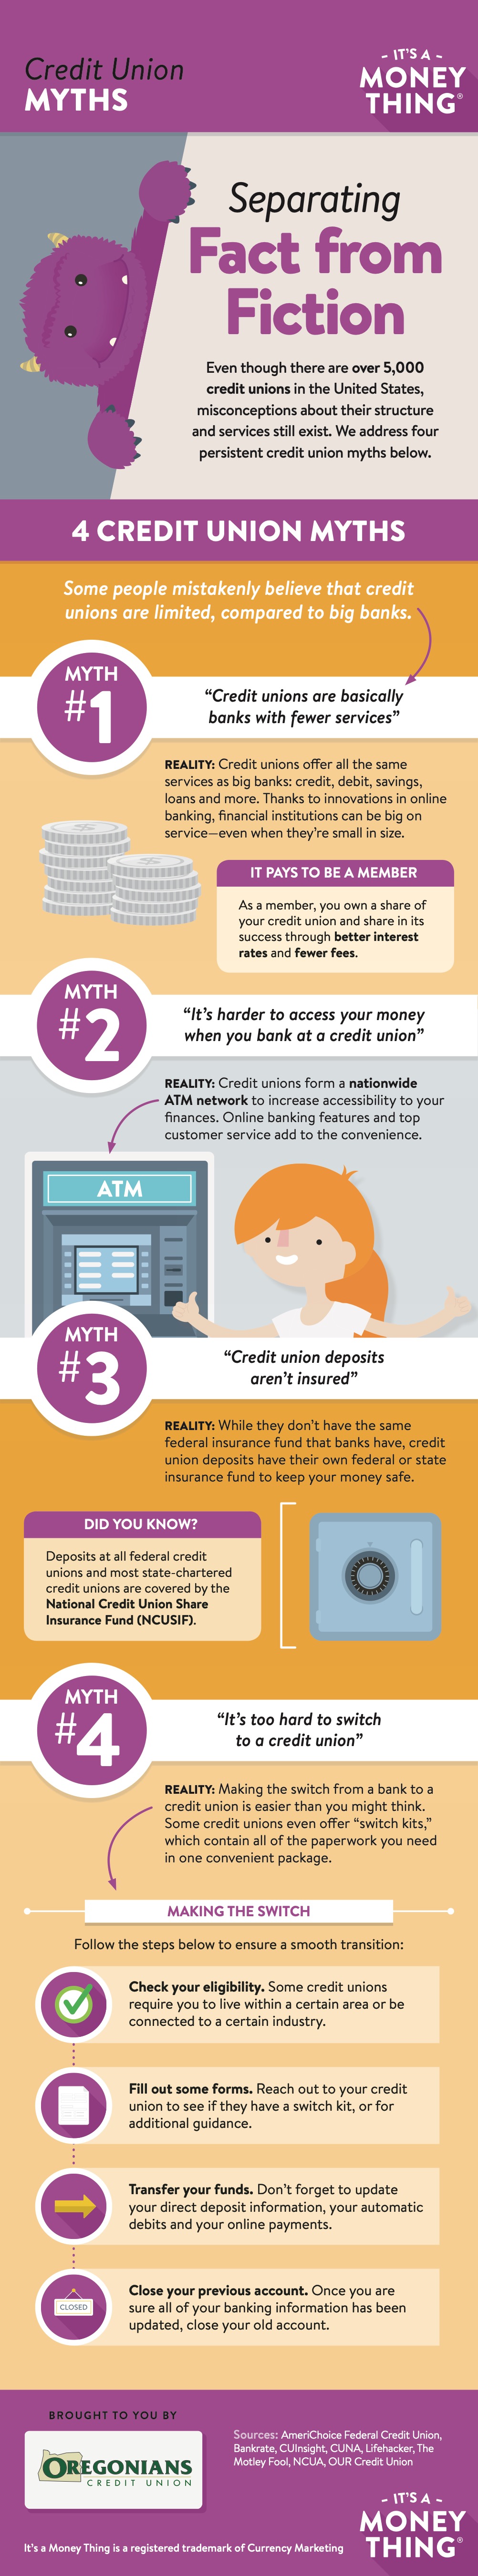 Credit Union Myths Infographic